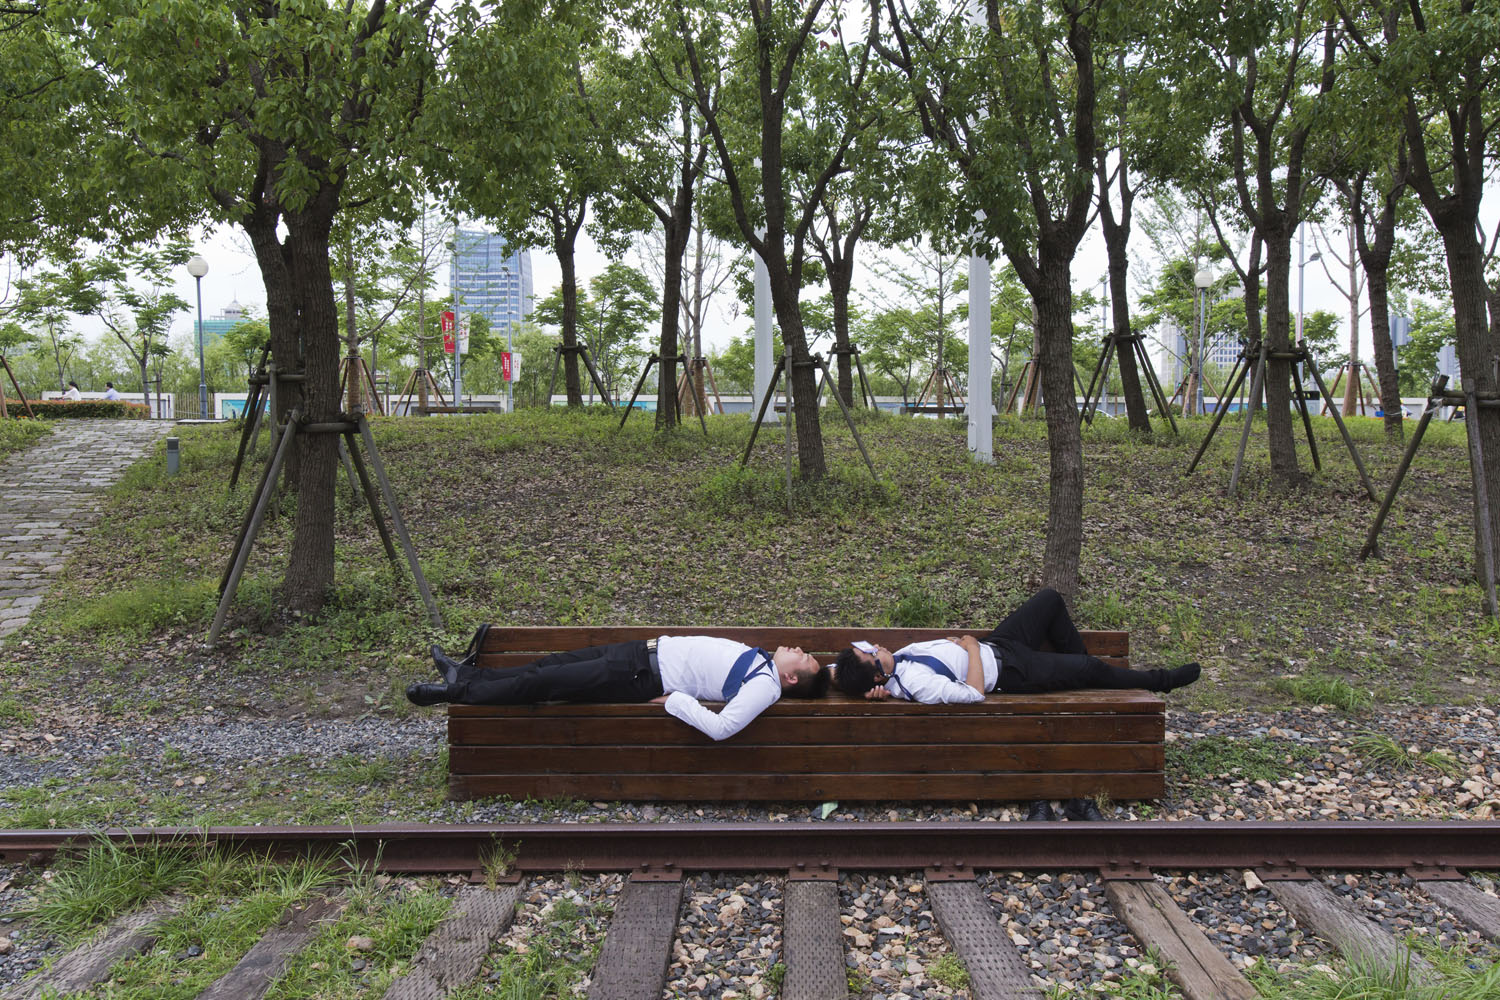 Two men resting on a bench at West Bund. Shanghai, China. 2017.